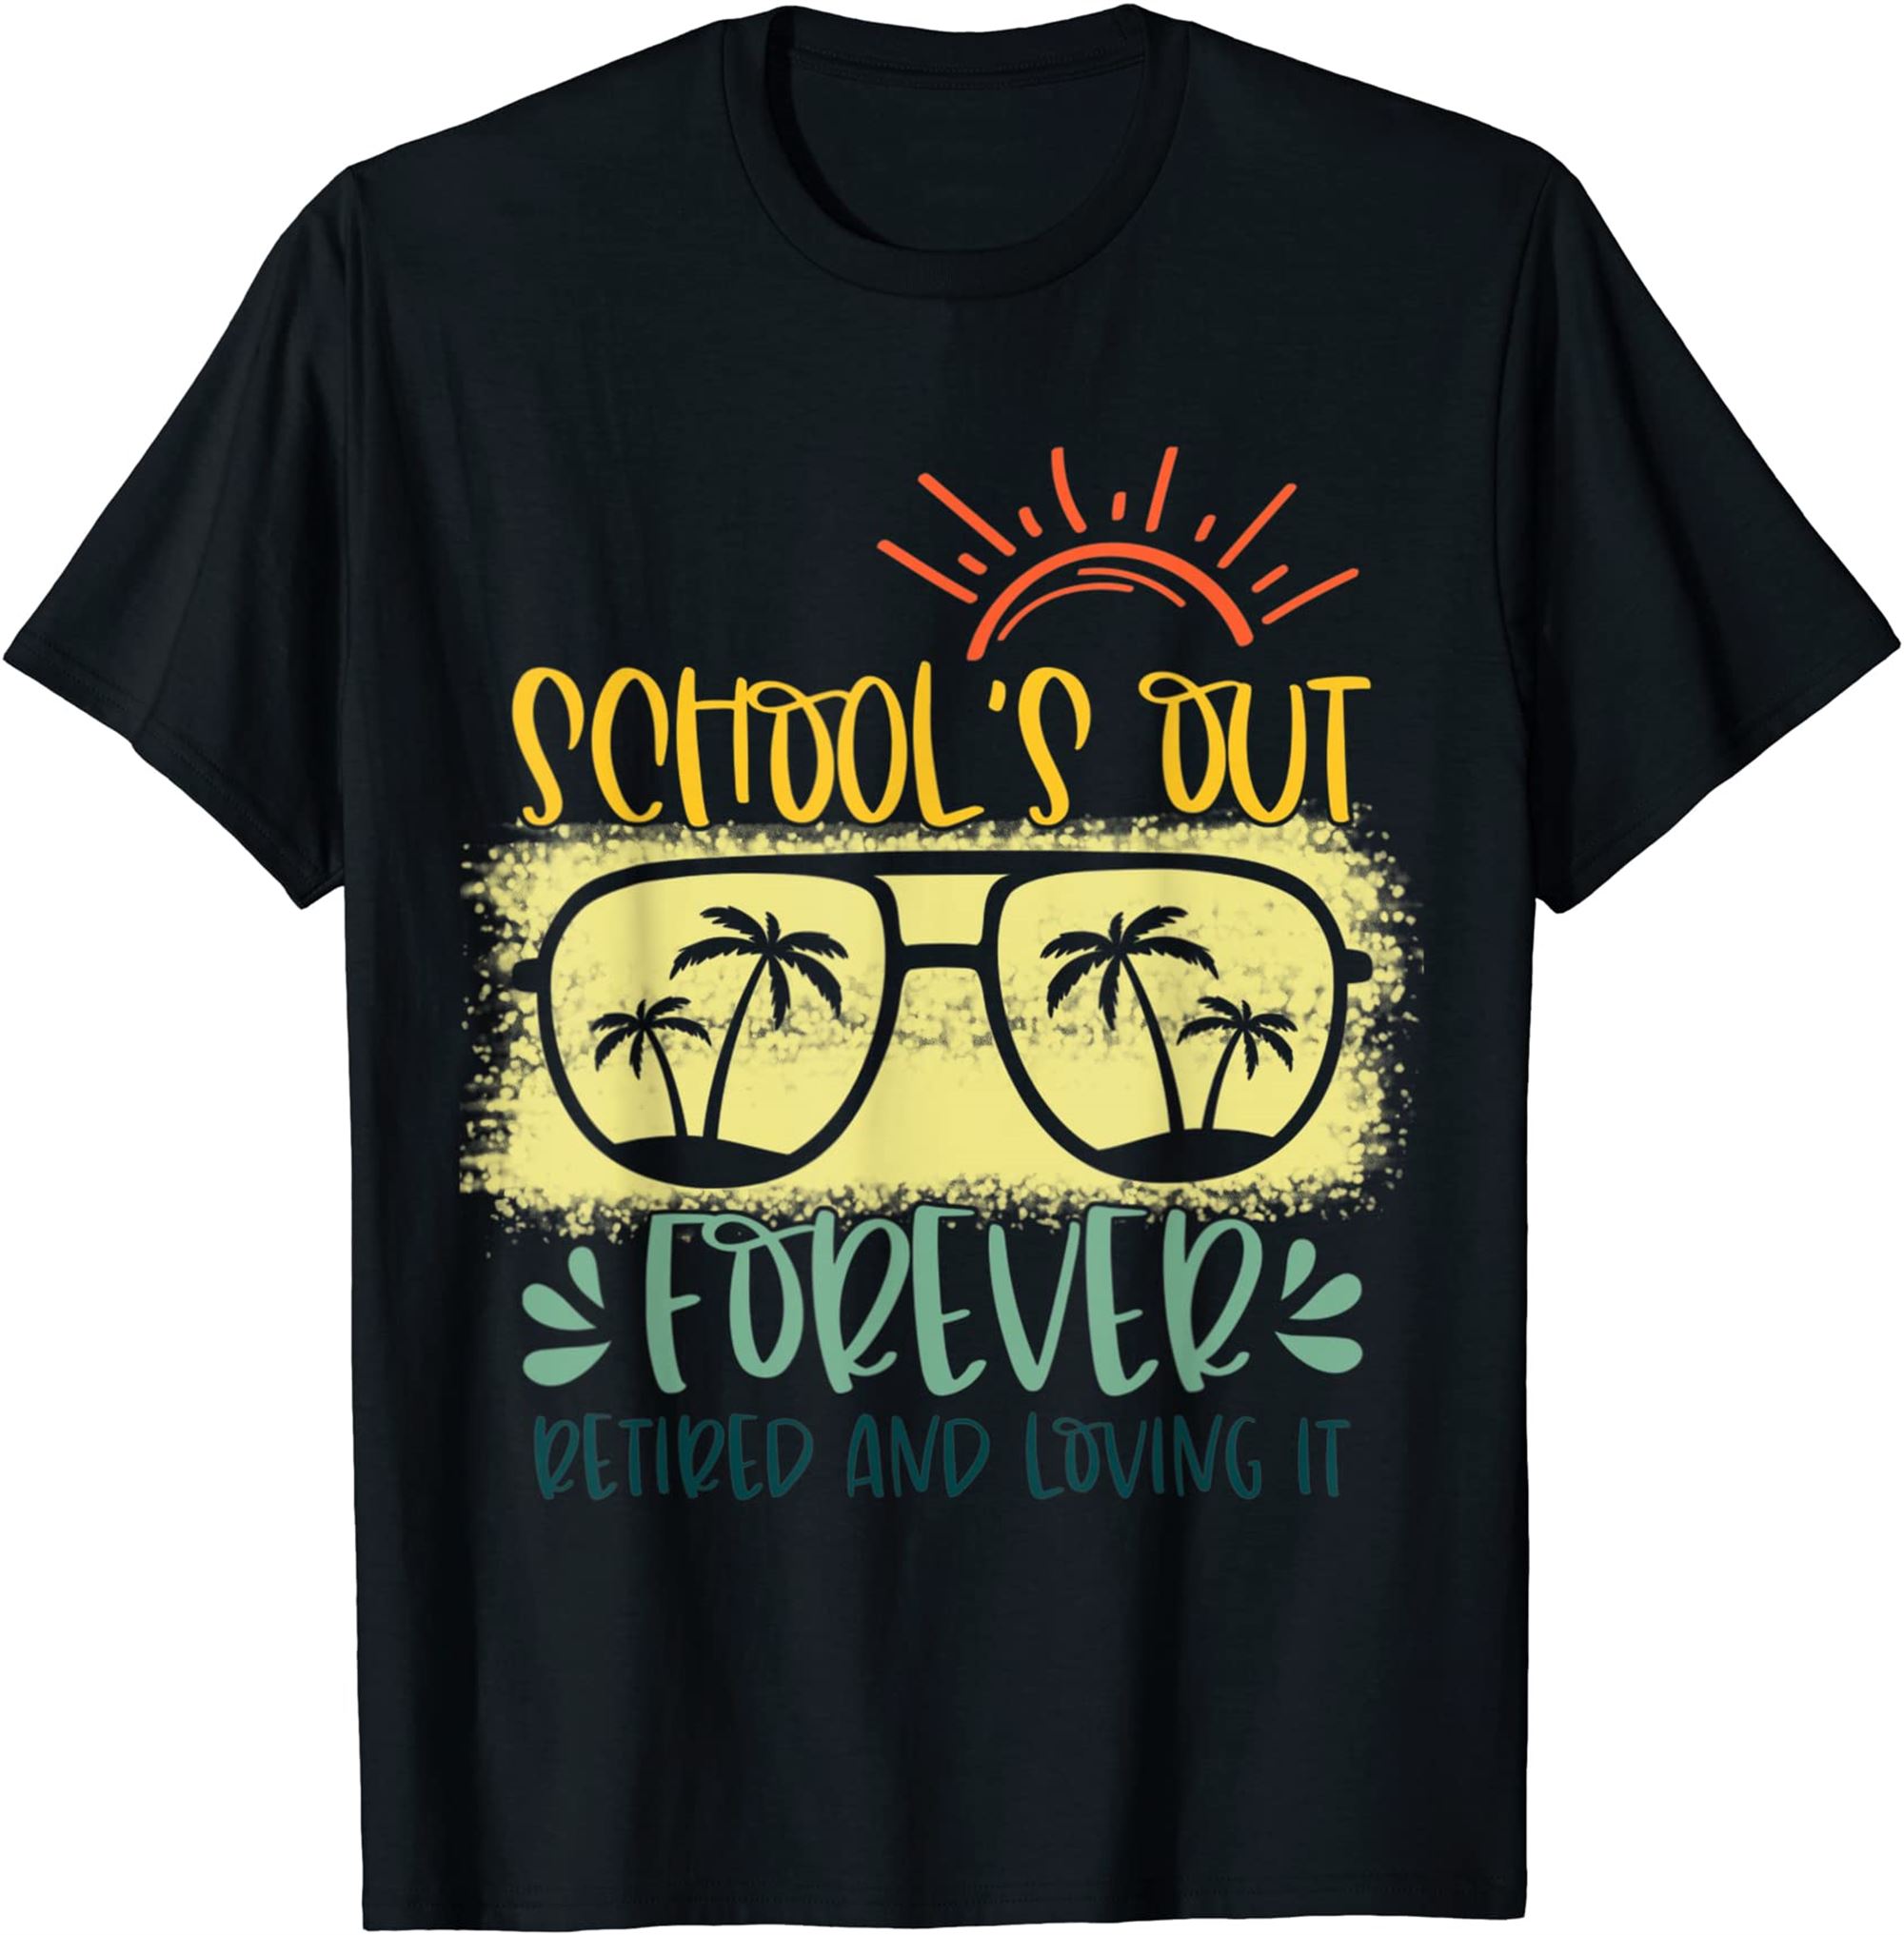 Vintage Schools Out Forever Retired Loving It Tee Teacher T-shirt Plus Size Up To 5xl